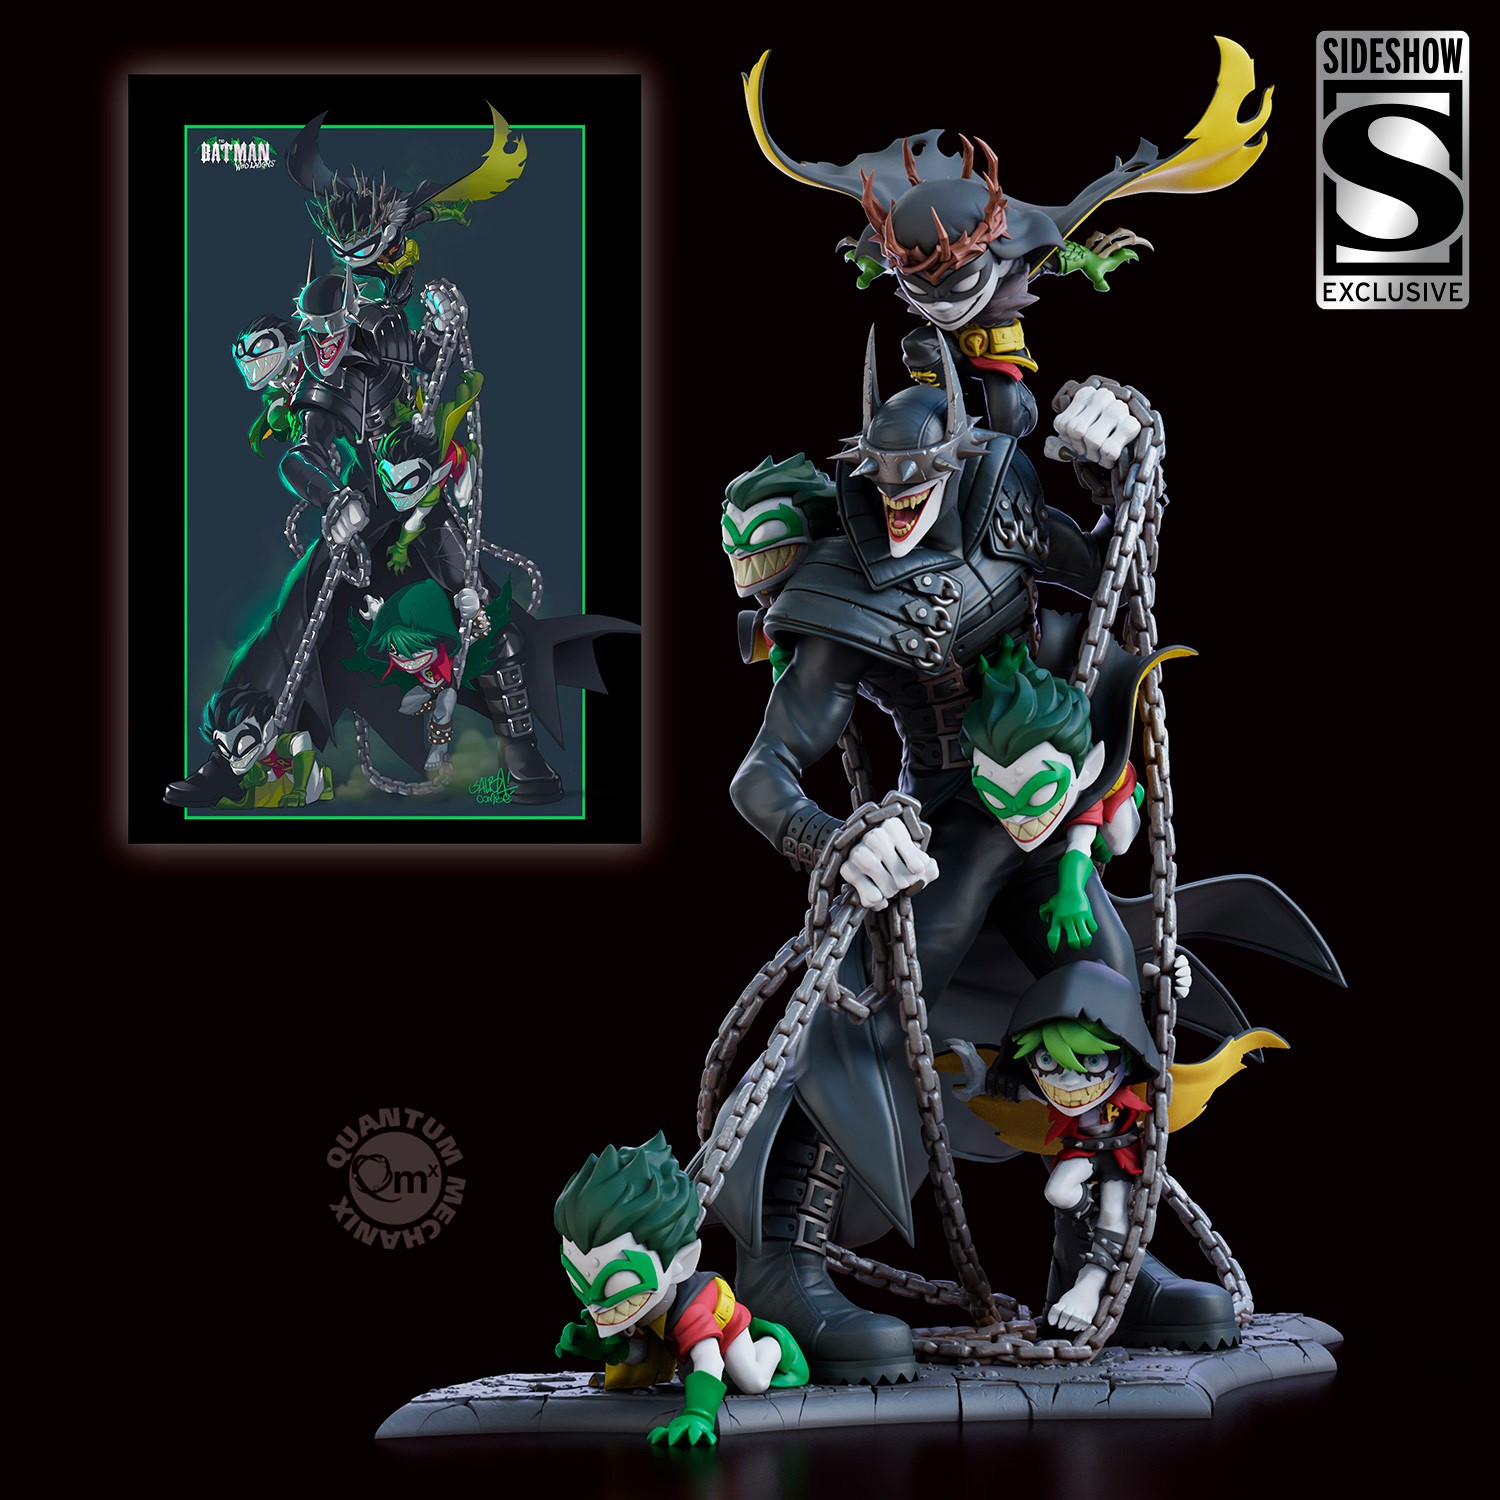 Batman Who Laughs (Artist Edition) Q-Master Exclusive Edition (Prototype Shown) View 1